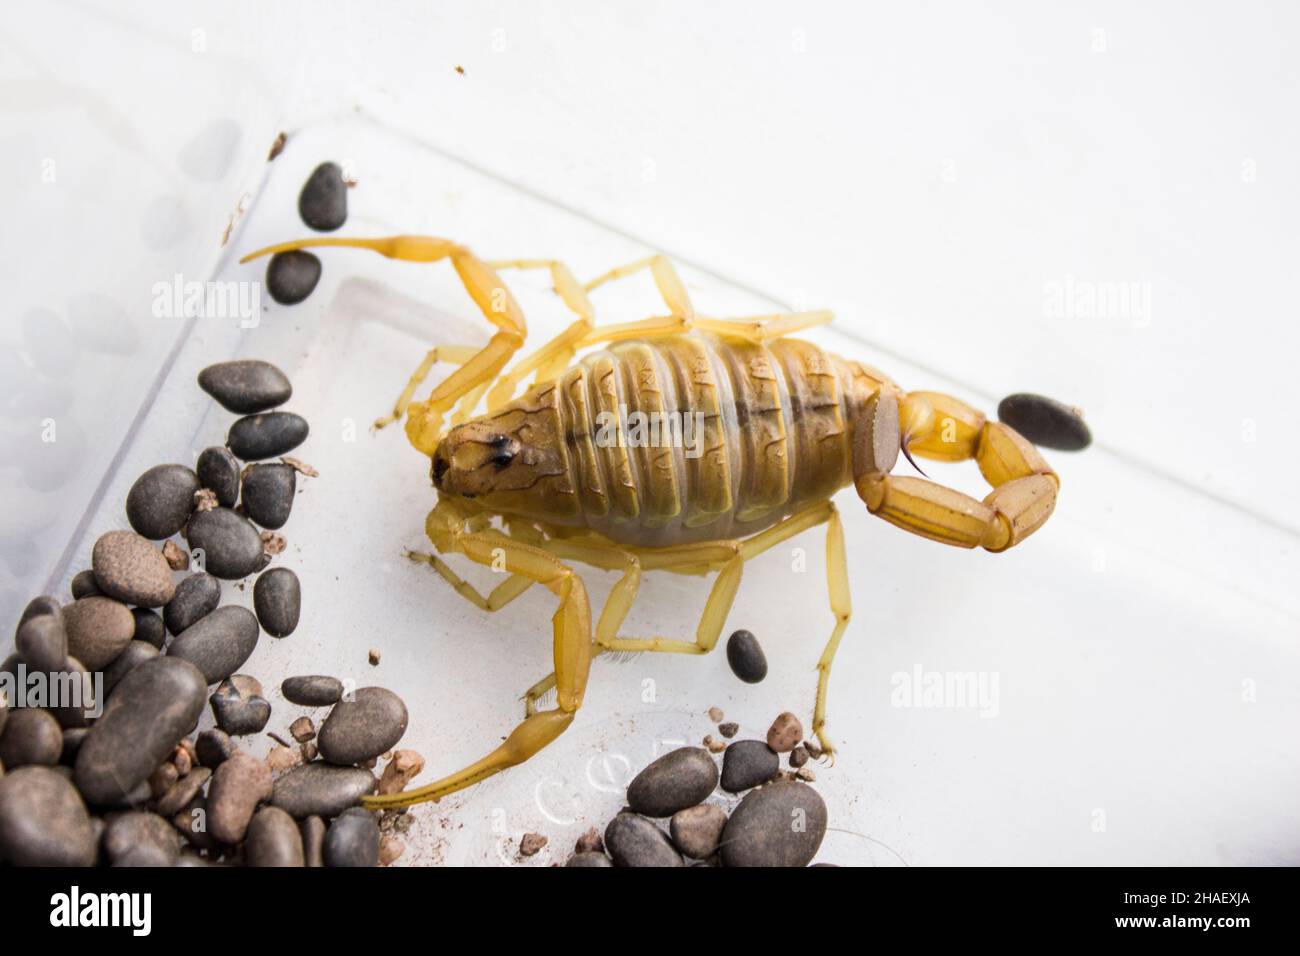 The deathstalker Leiurus quinquestriatus is a species of scorpion, a member of the family Buthidae. It is also known as the Palestine yellow scorpion, Stock Photo